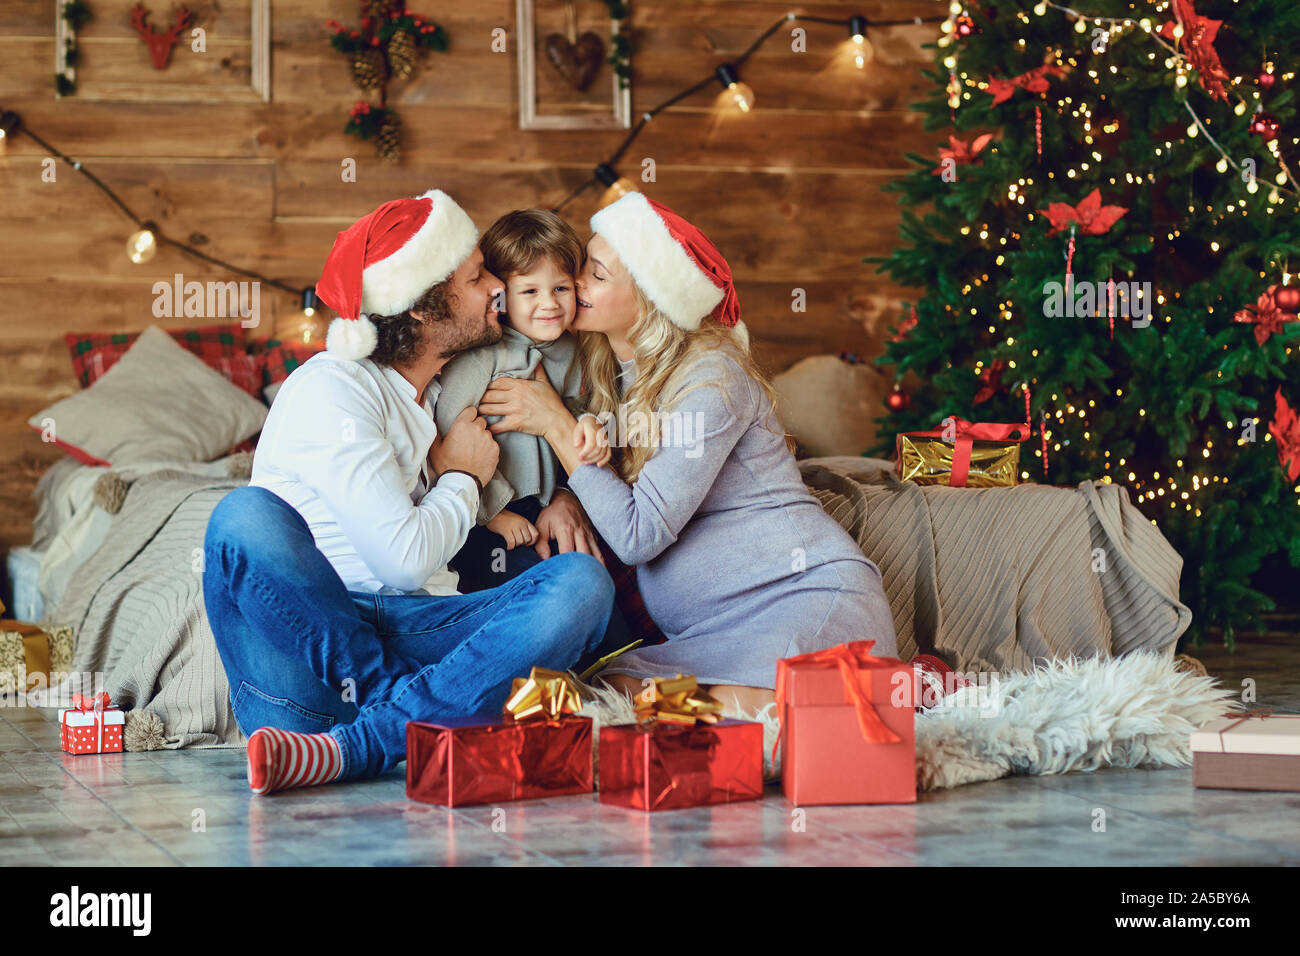 Family kisses the child in the house at Christmas. Stock Photo